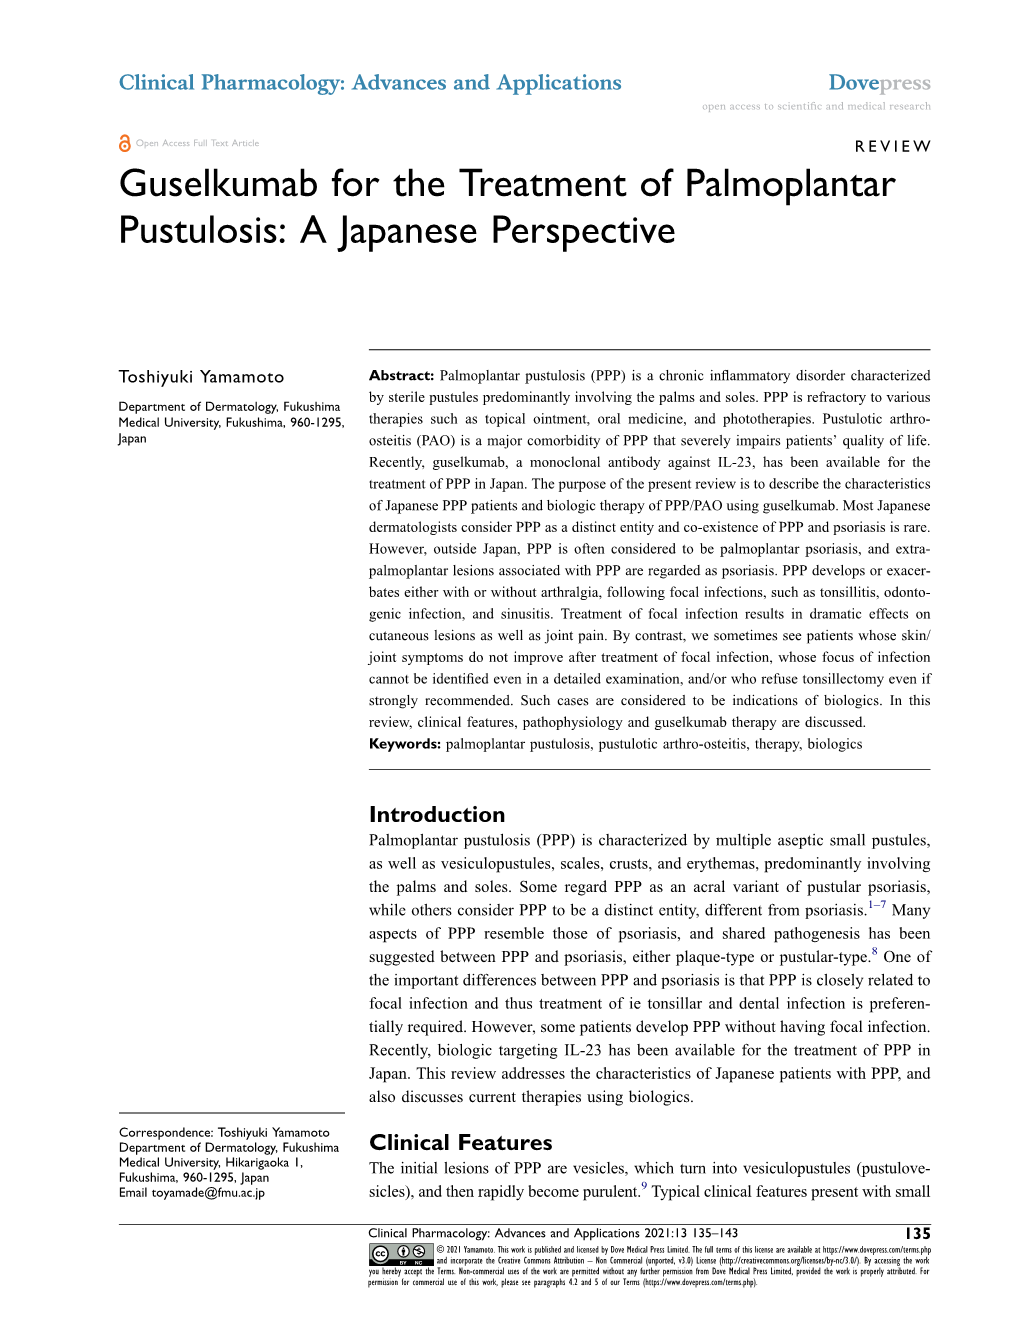 Guselkumab for the Treatment of Palmoplantar Pustulosis: a Japanese Perspective